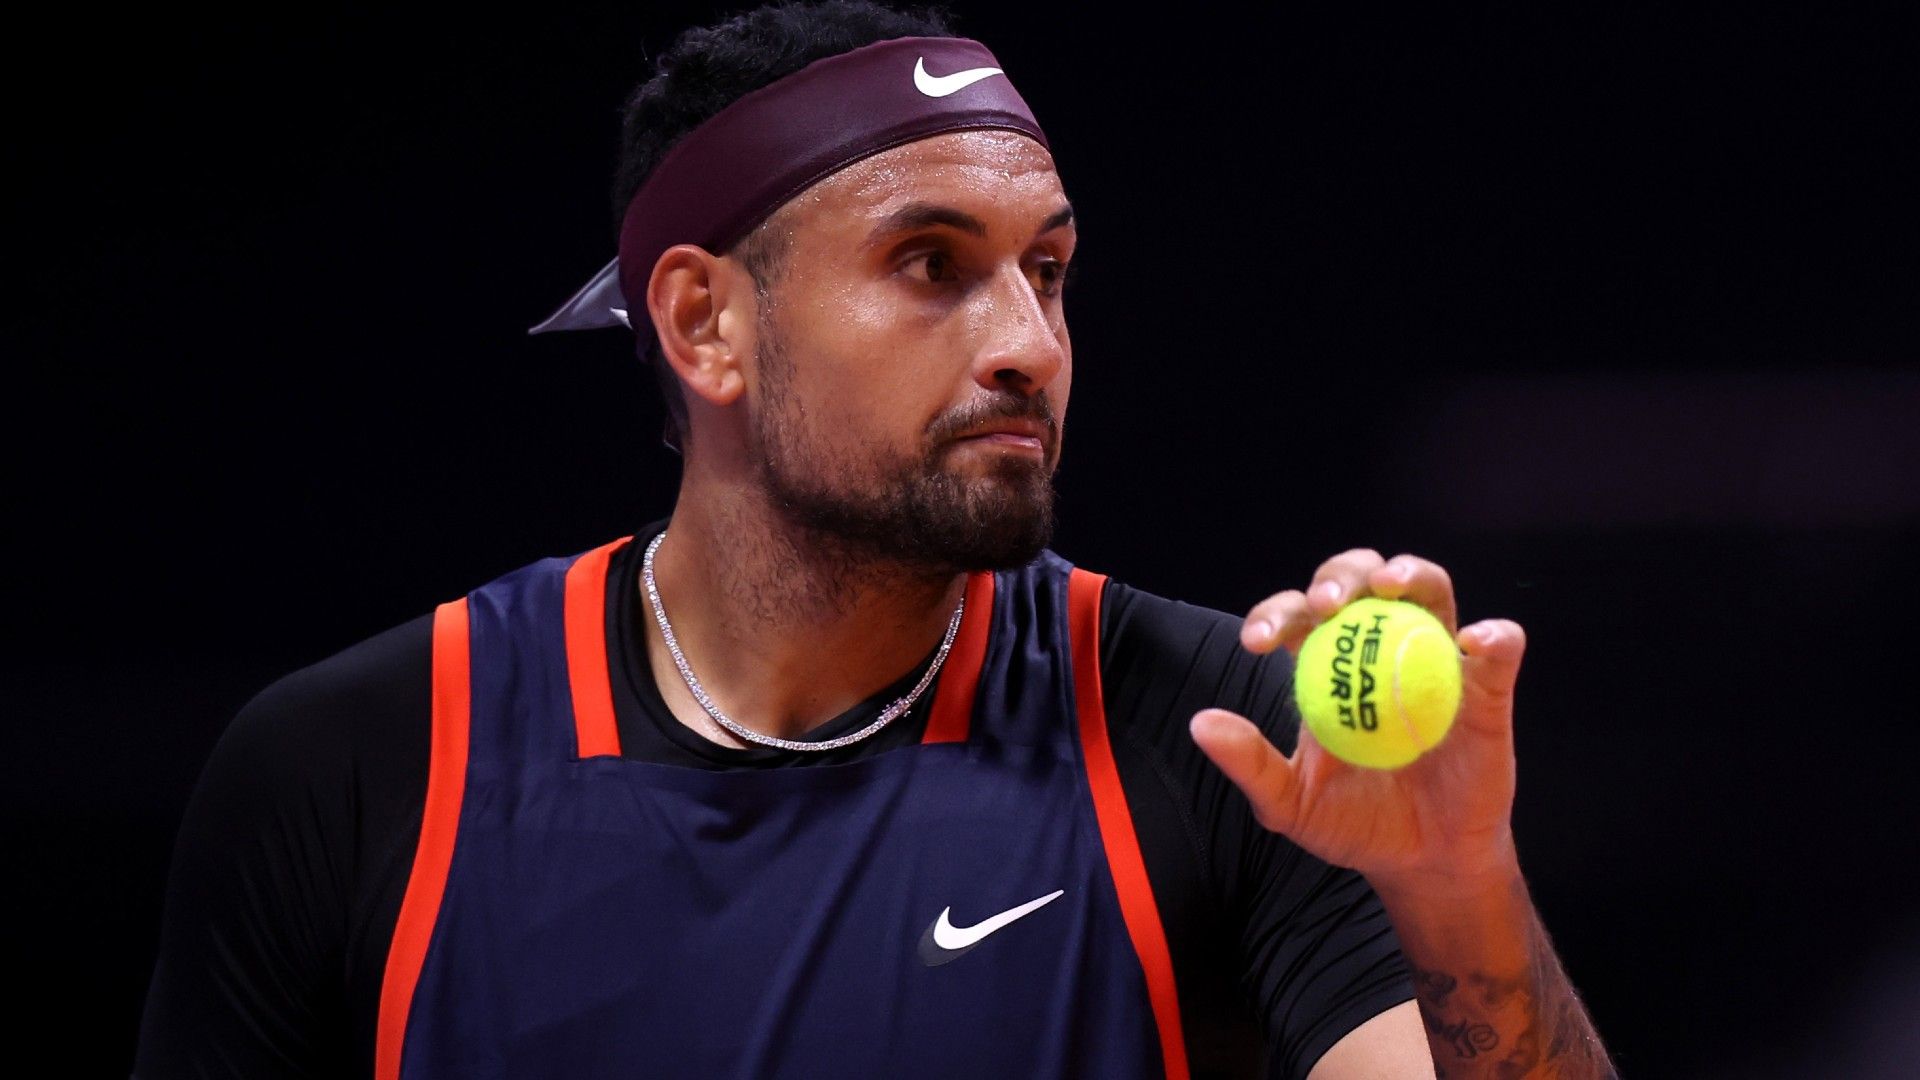 'Spiralling' Nick Kyrgios explains how he saved himself in revealing Netflix documentary